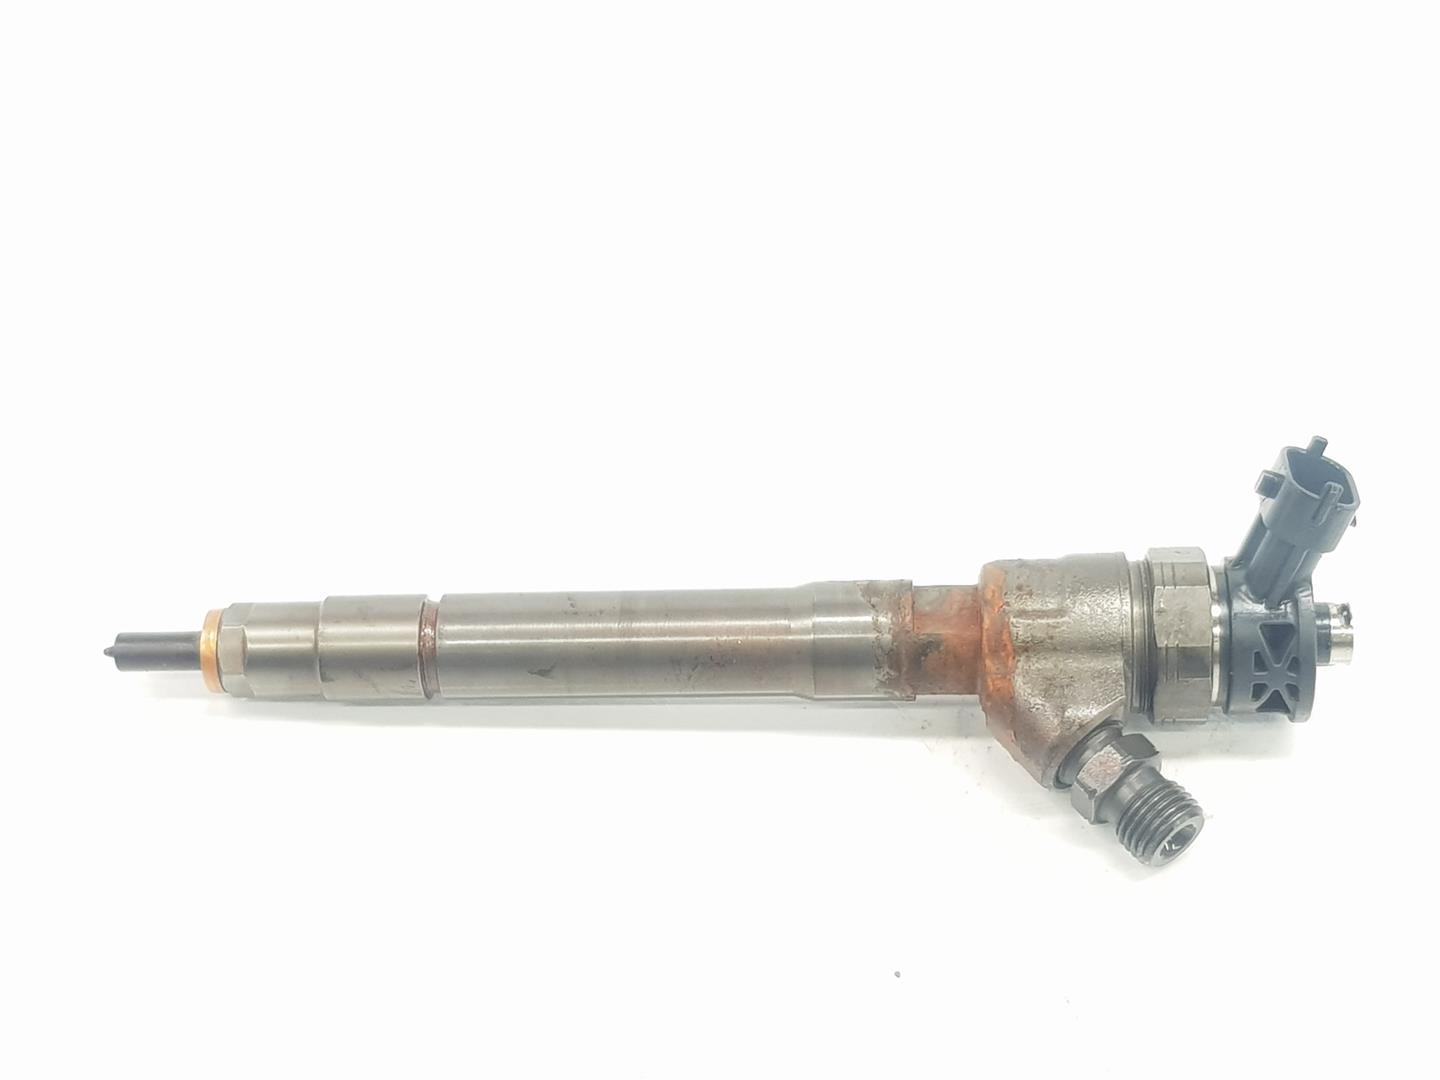 RENAULT Trafic 2 generation (2001-2015) Fuel Injector 166105302R, 166105302R, 1111AA 24224233